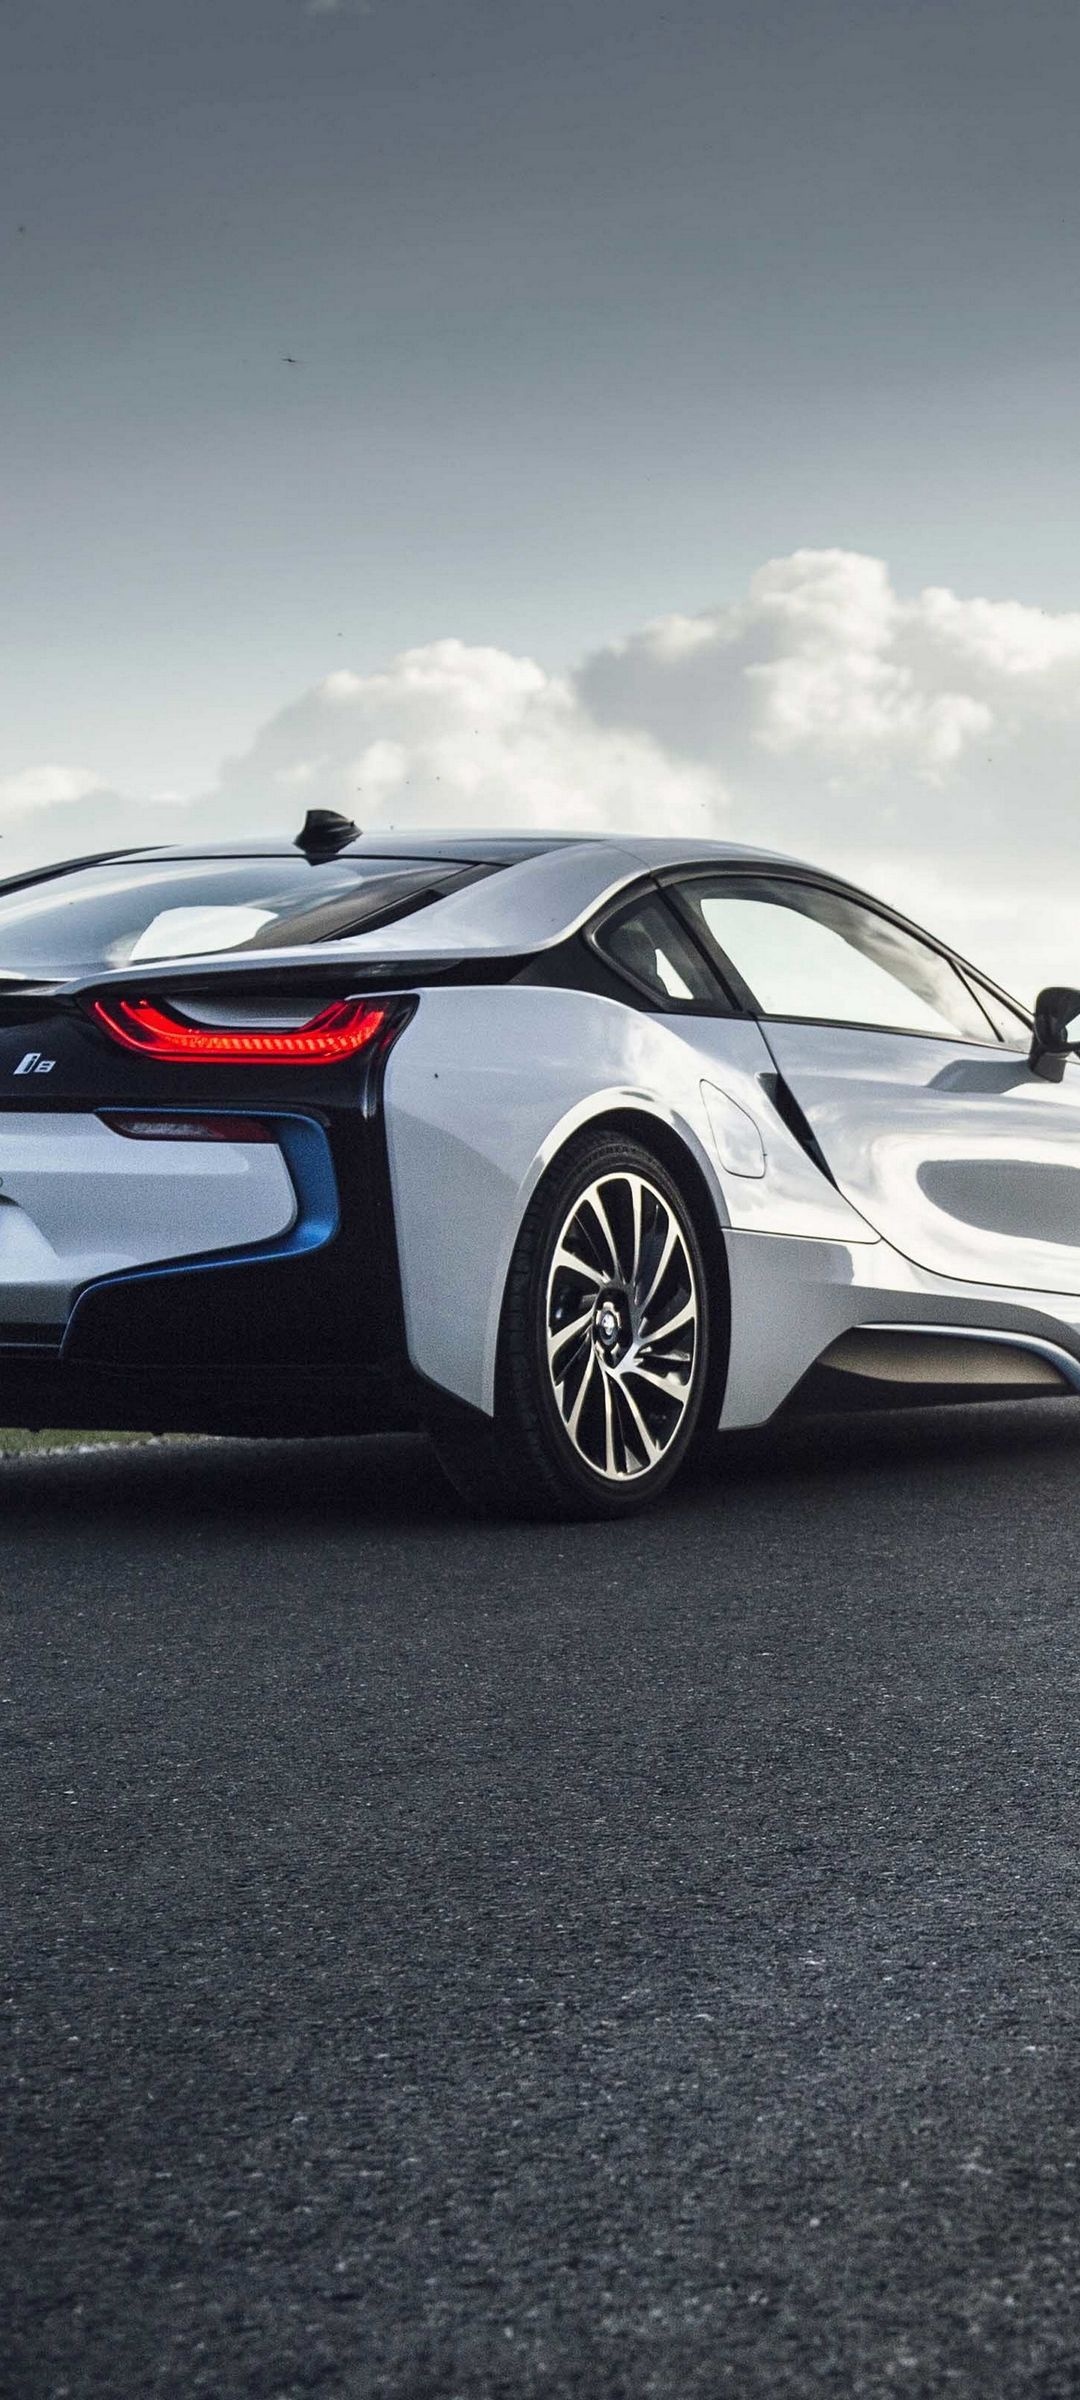 BMW i8, Rear view seduction, Striking silhouette, Unmatched performance, Captivating design, 1080x2400 HD Handy